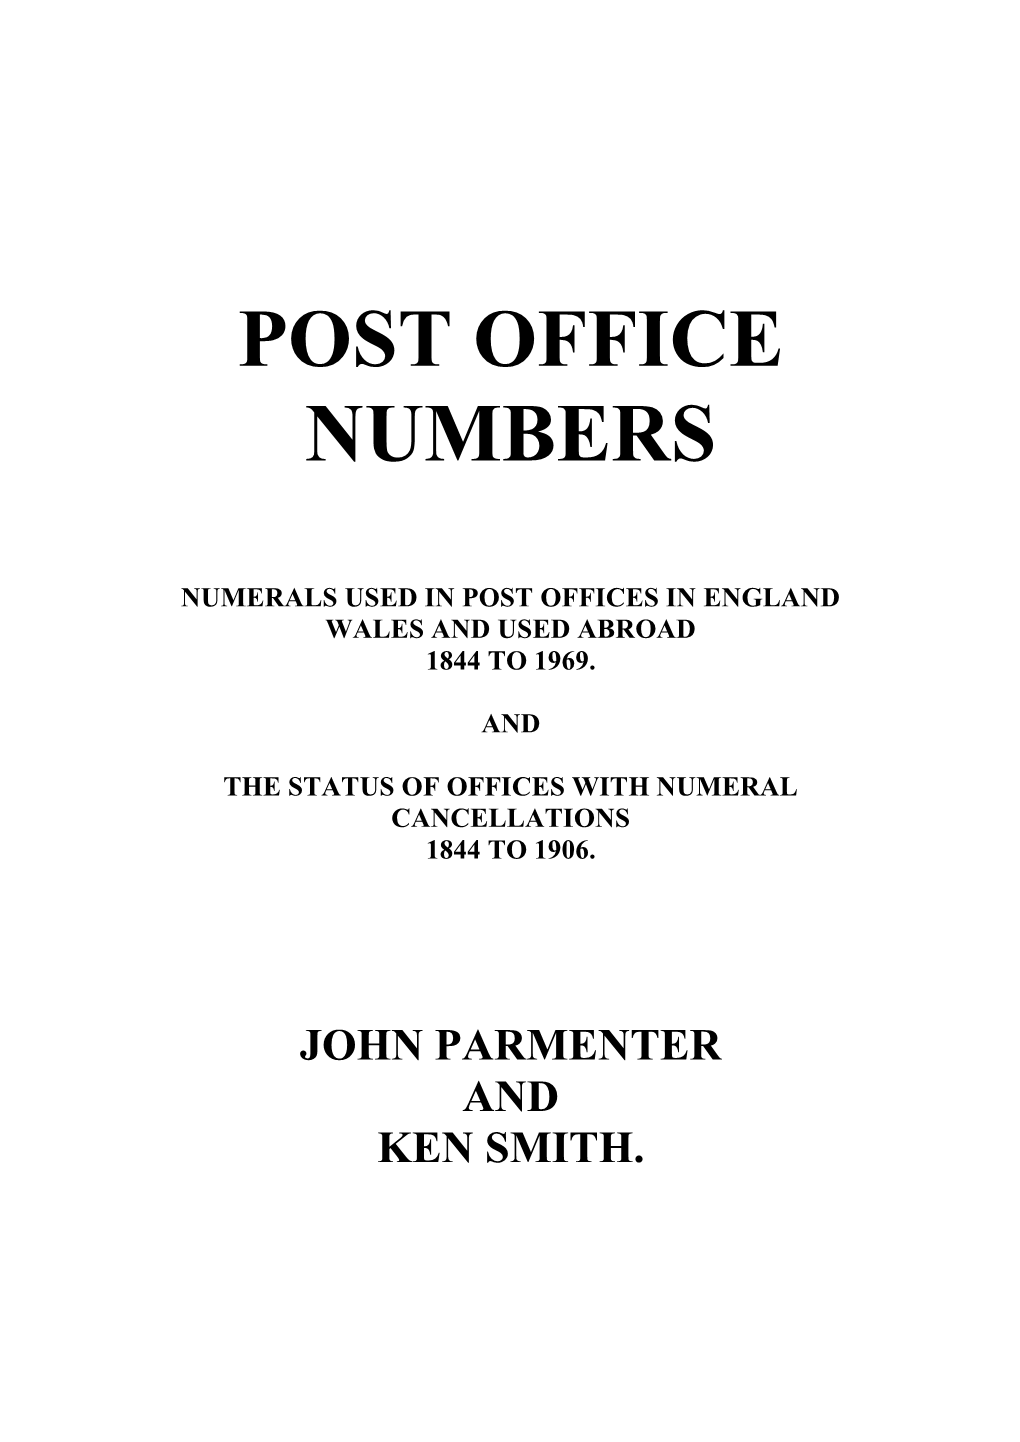 Post Office Numbers